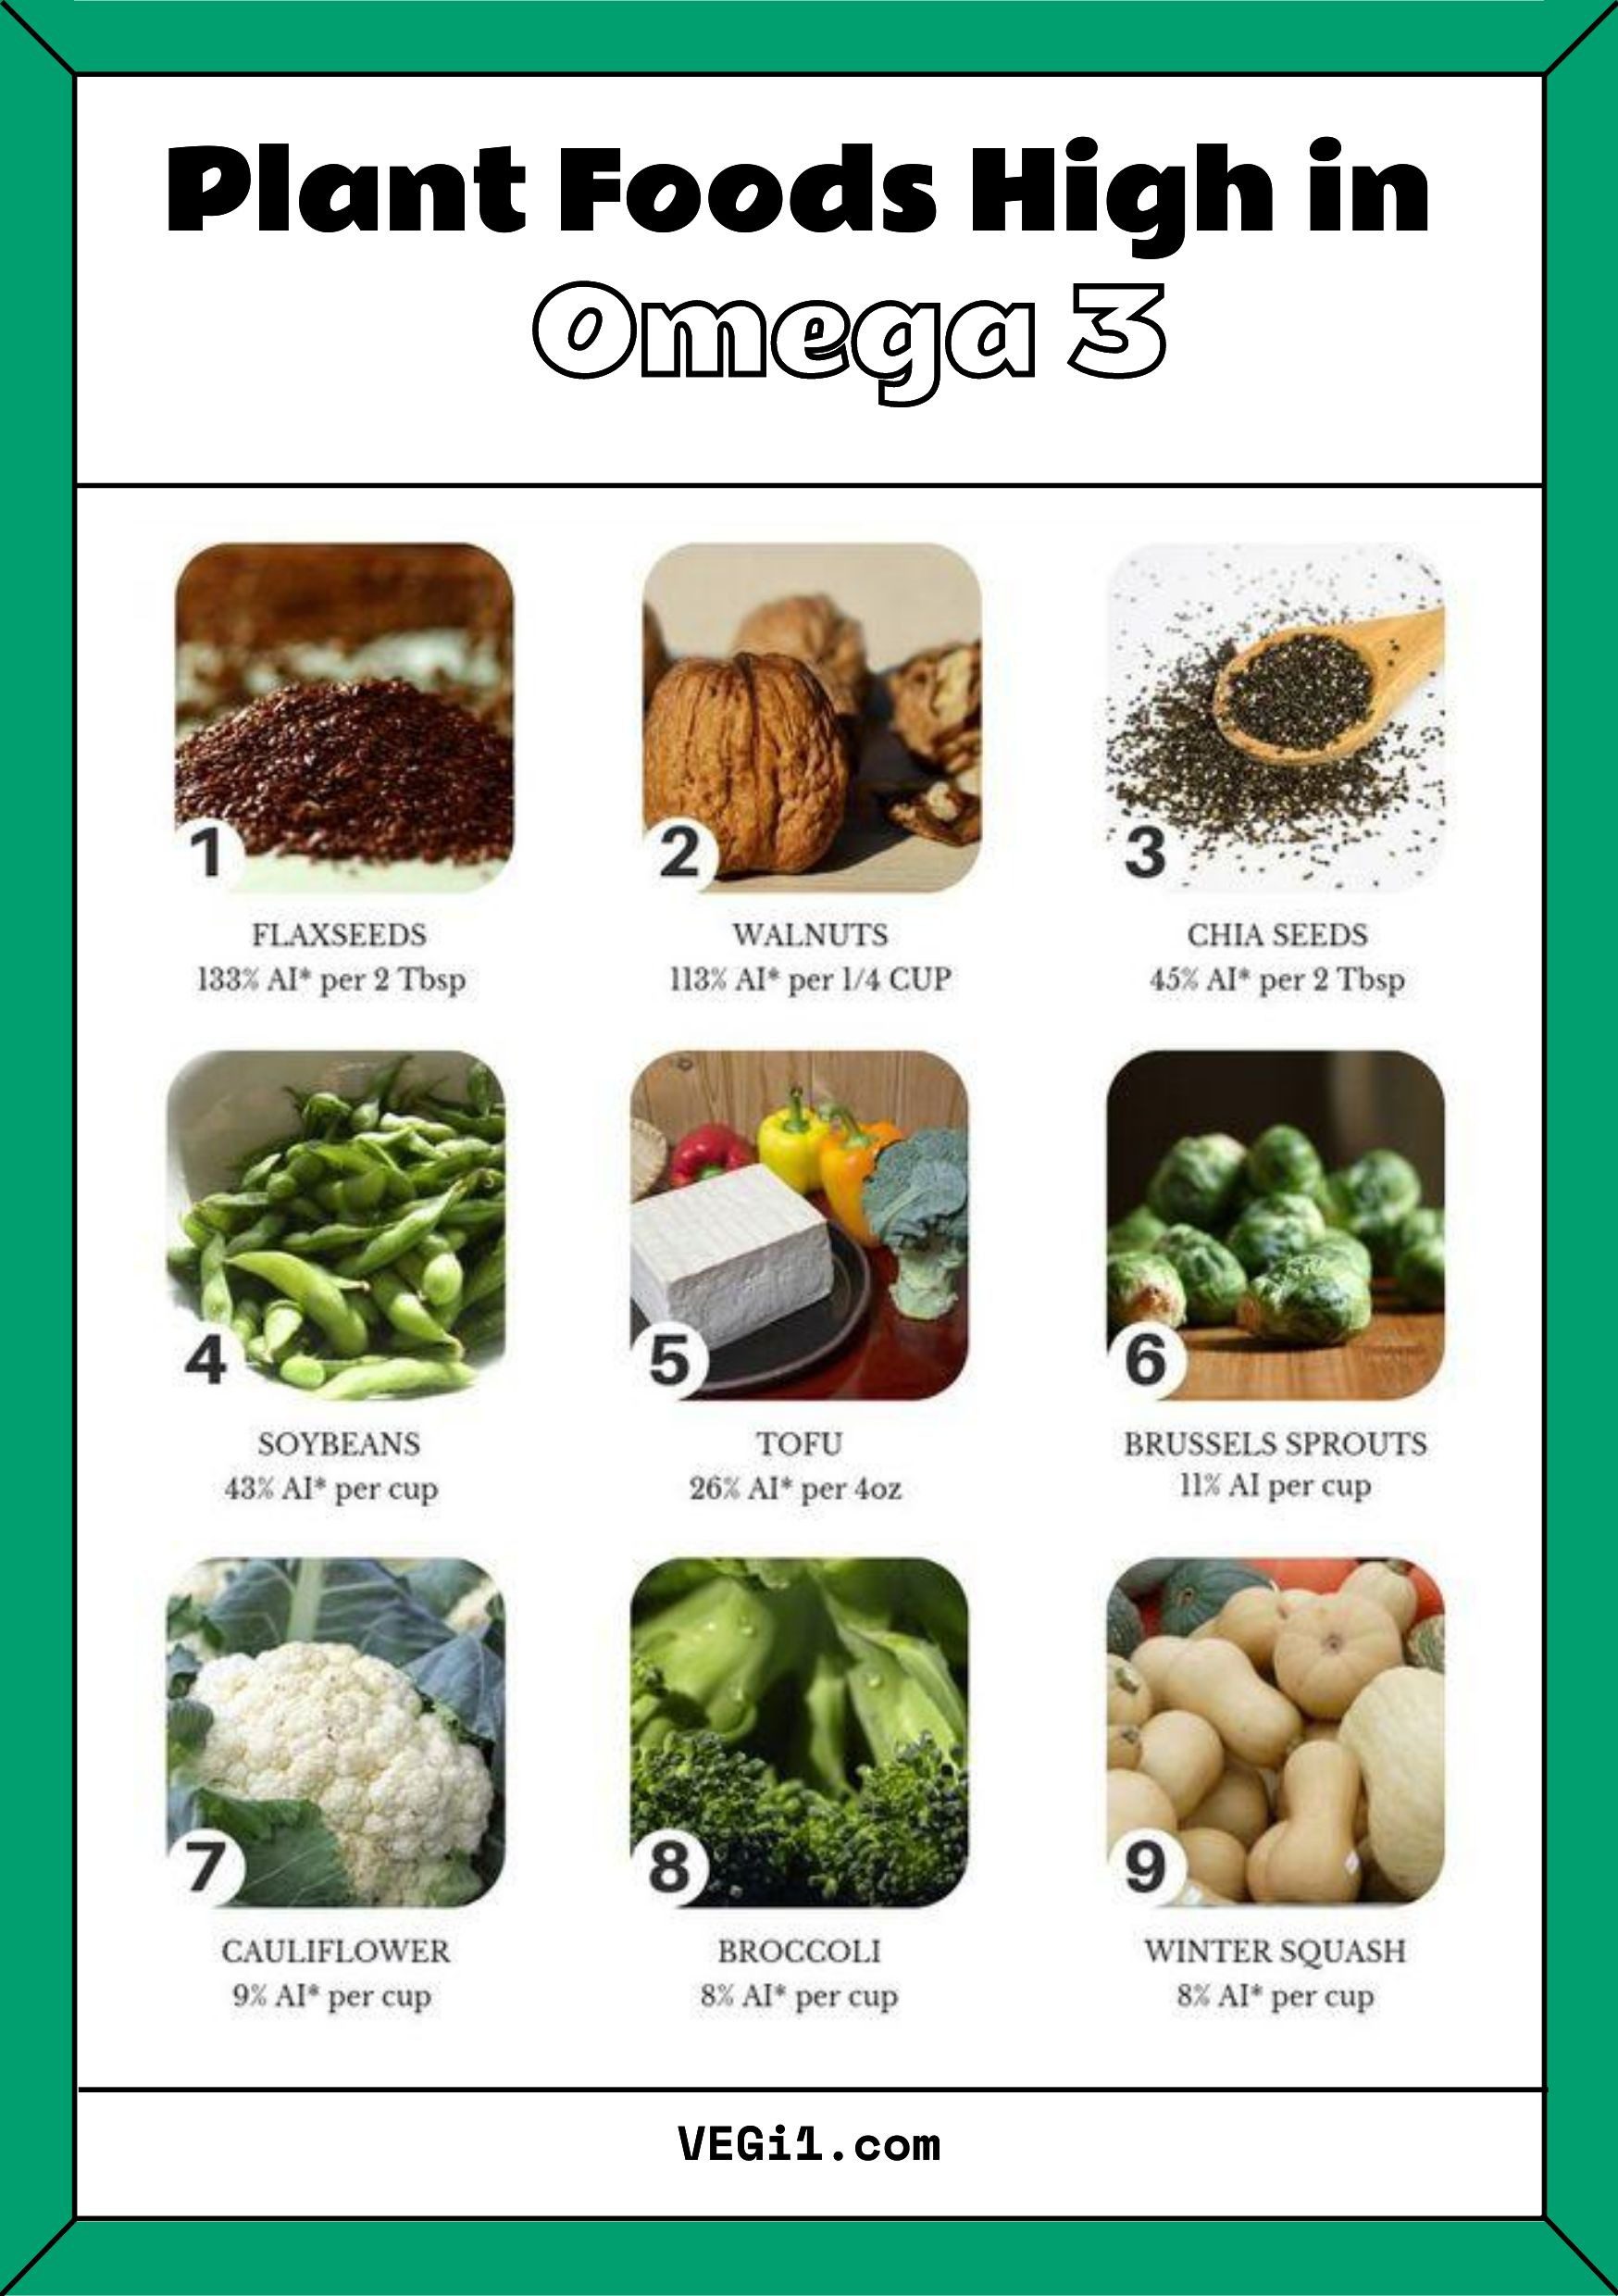 Plant based Foods High in omega3